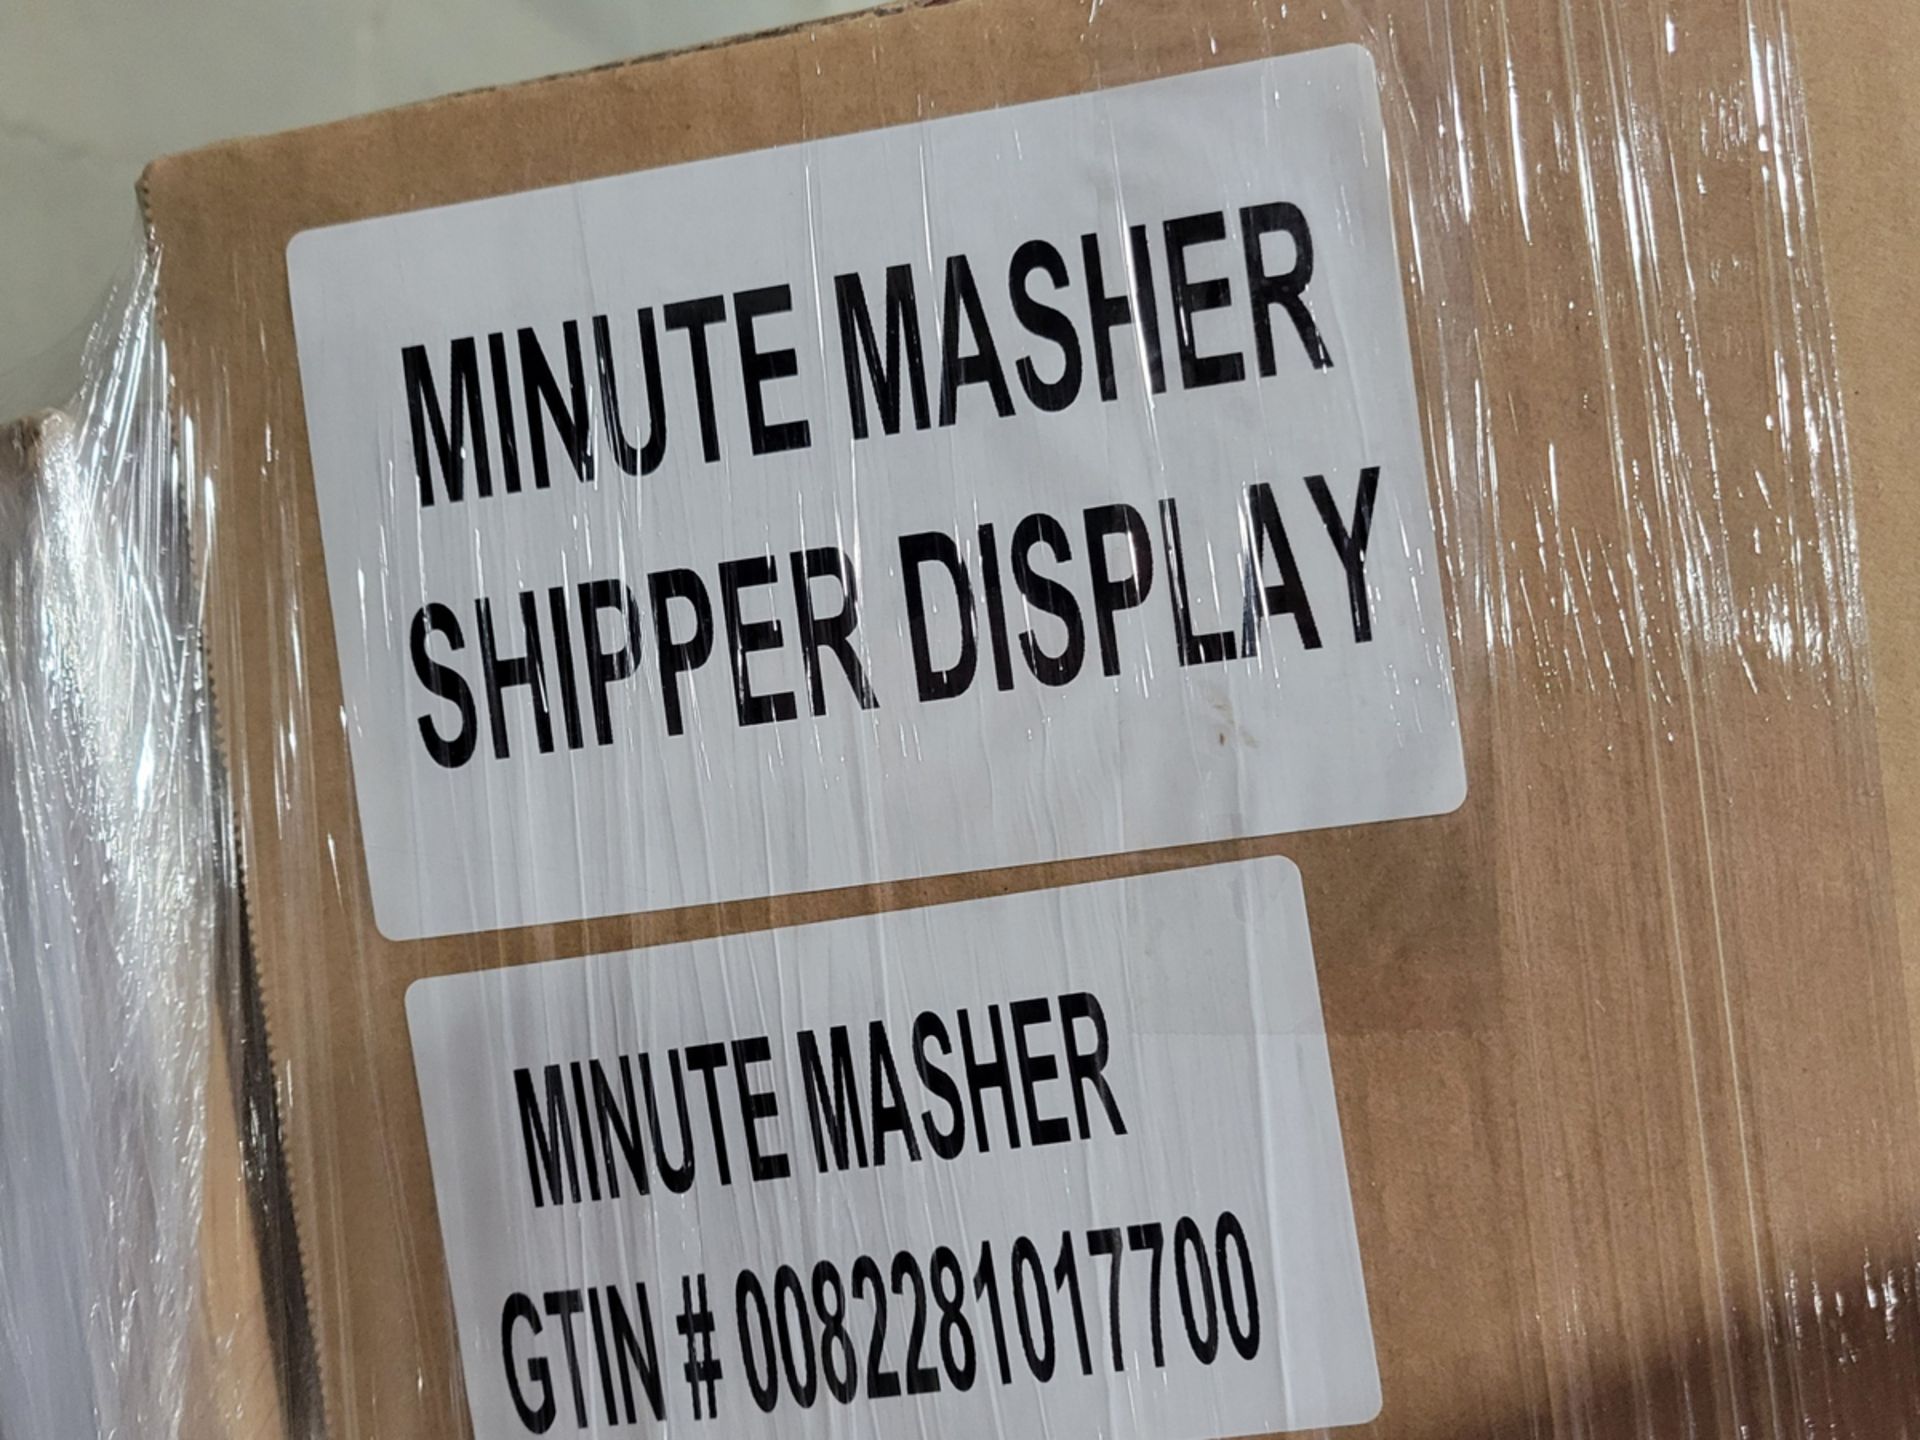 {Each} Minute Masher Shipper Display Stand